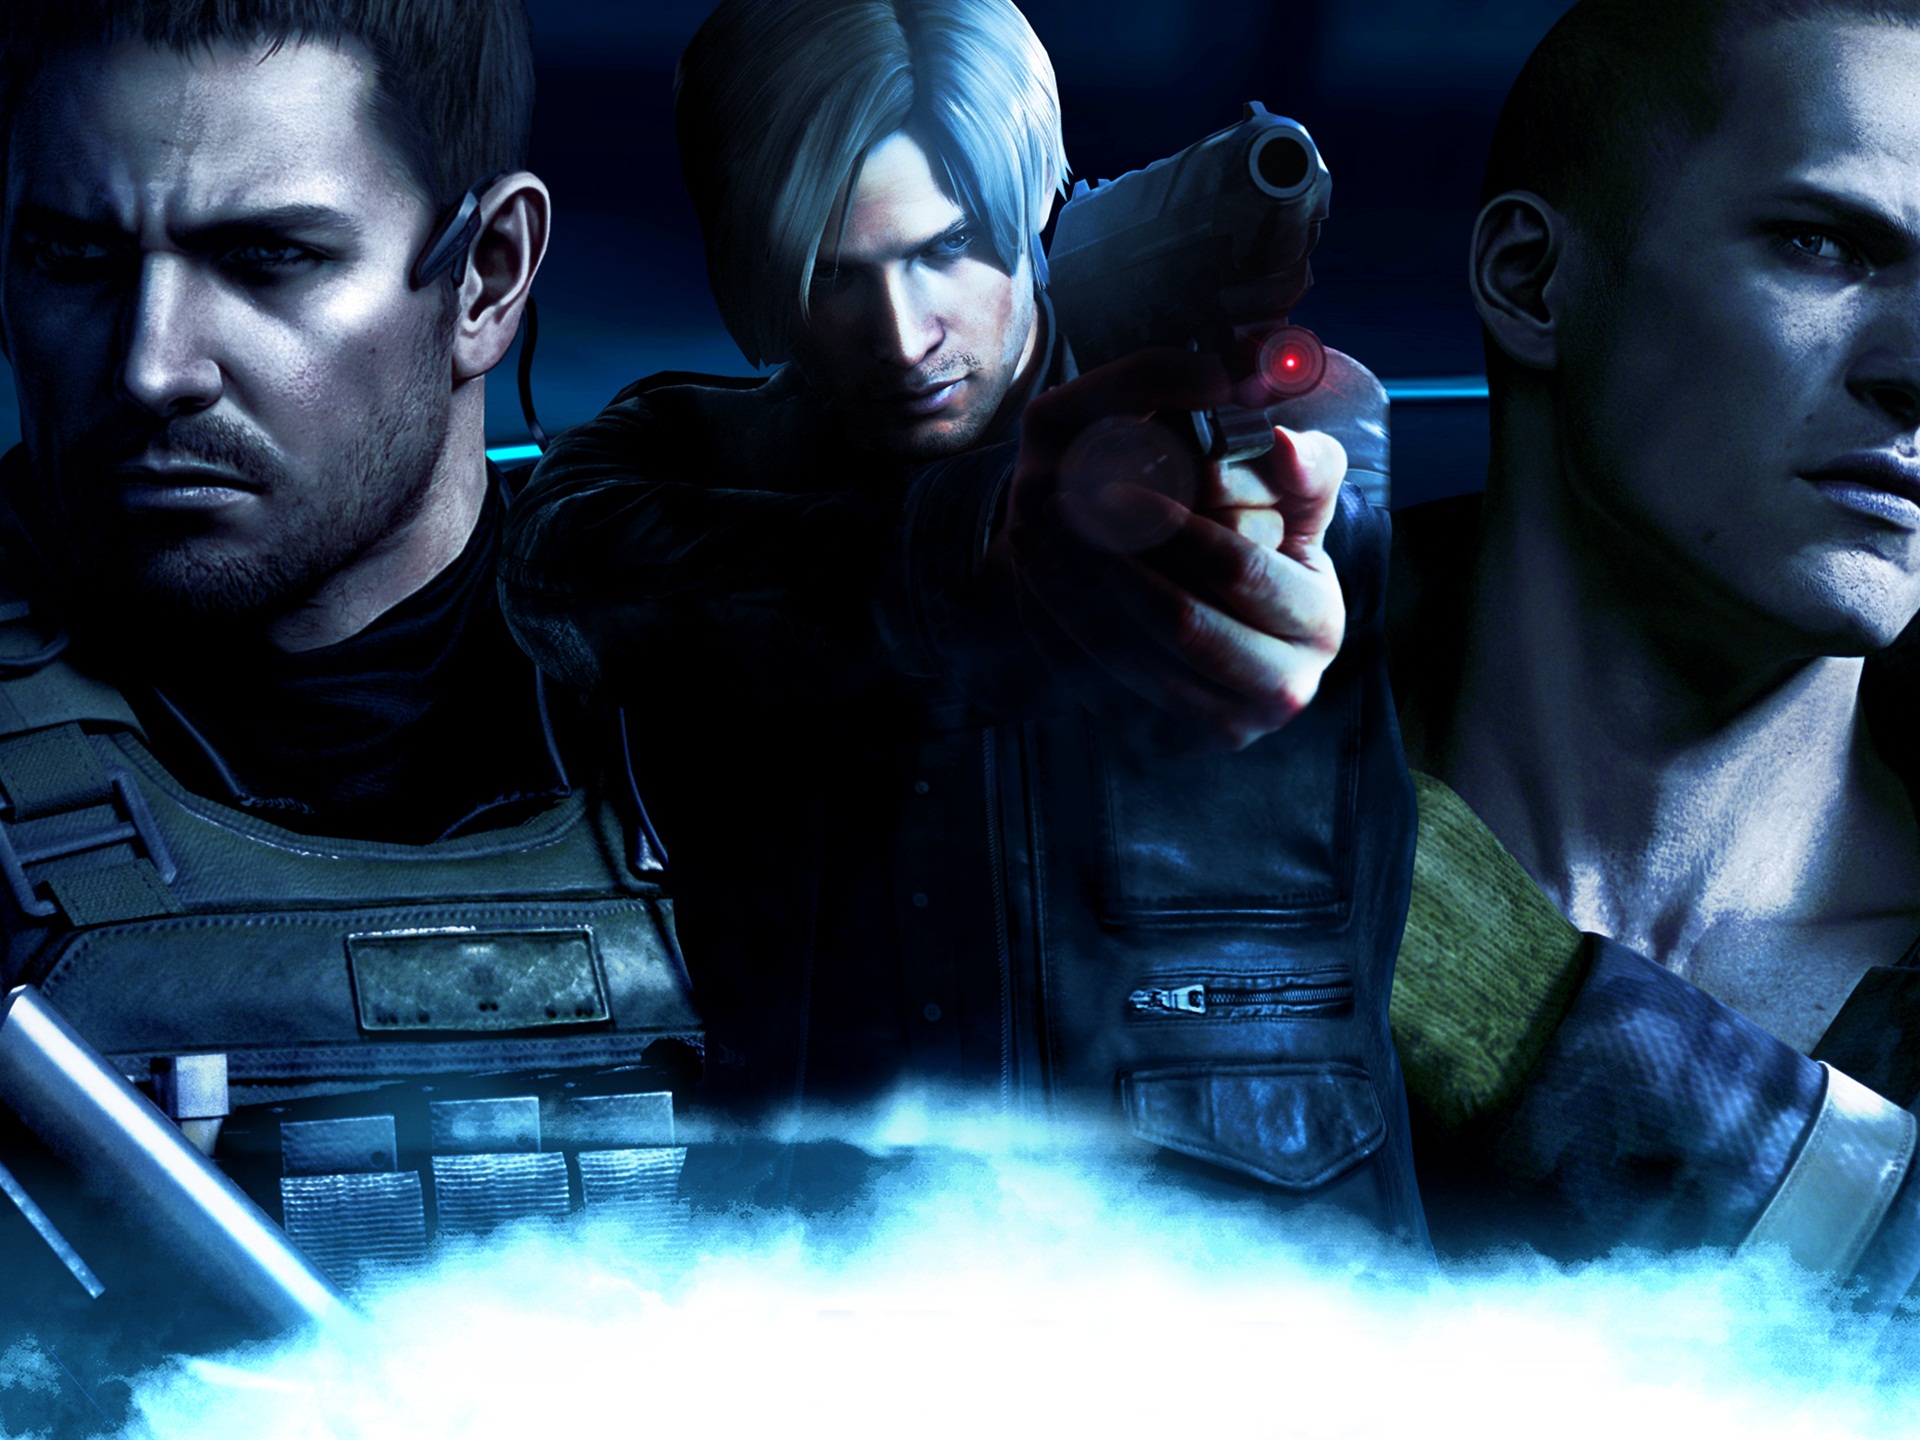 Resident Evil 6 HD game wallpapers #6 - 1920x1440